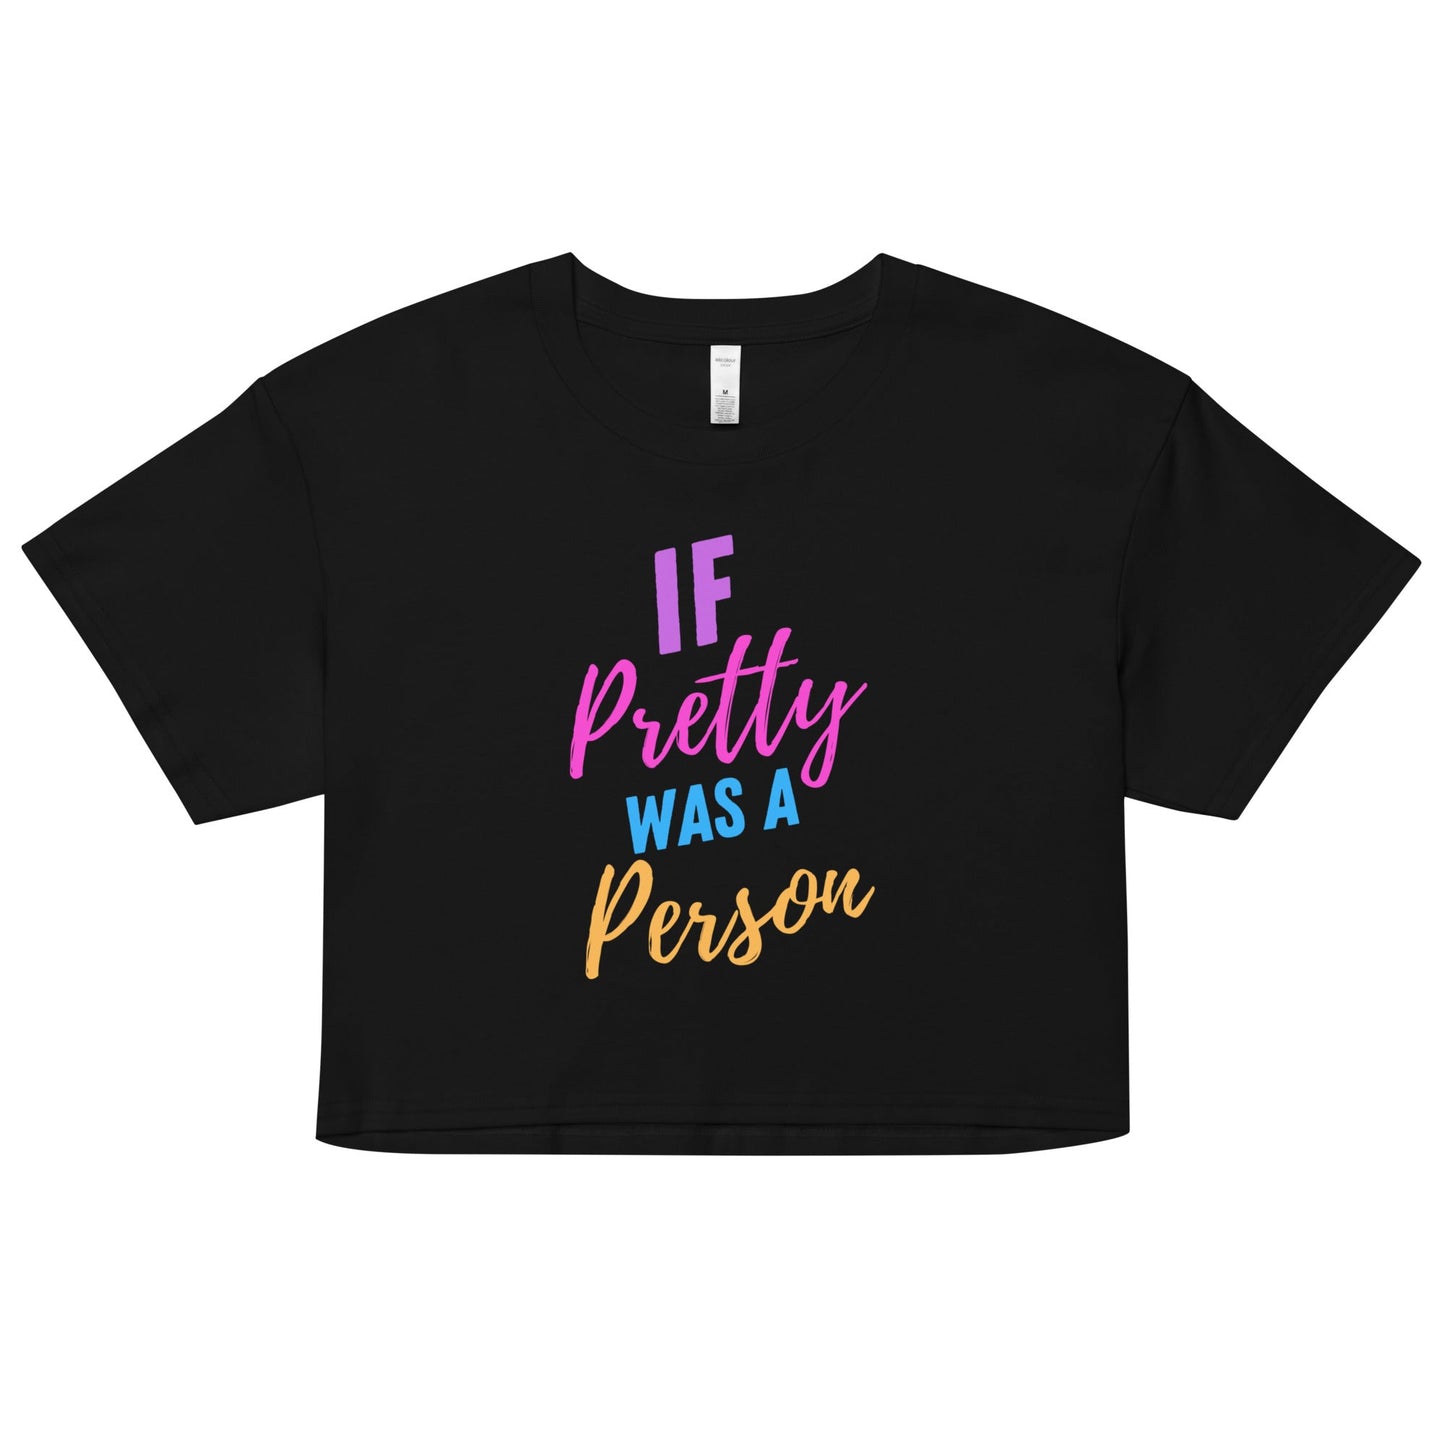 If Pretty Was a Person Women’s crop top - Catch This Tea Shirts